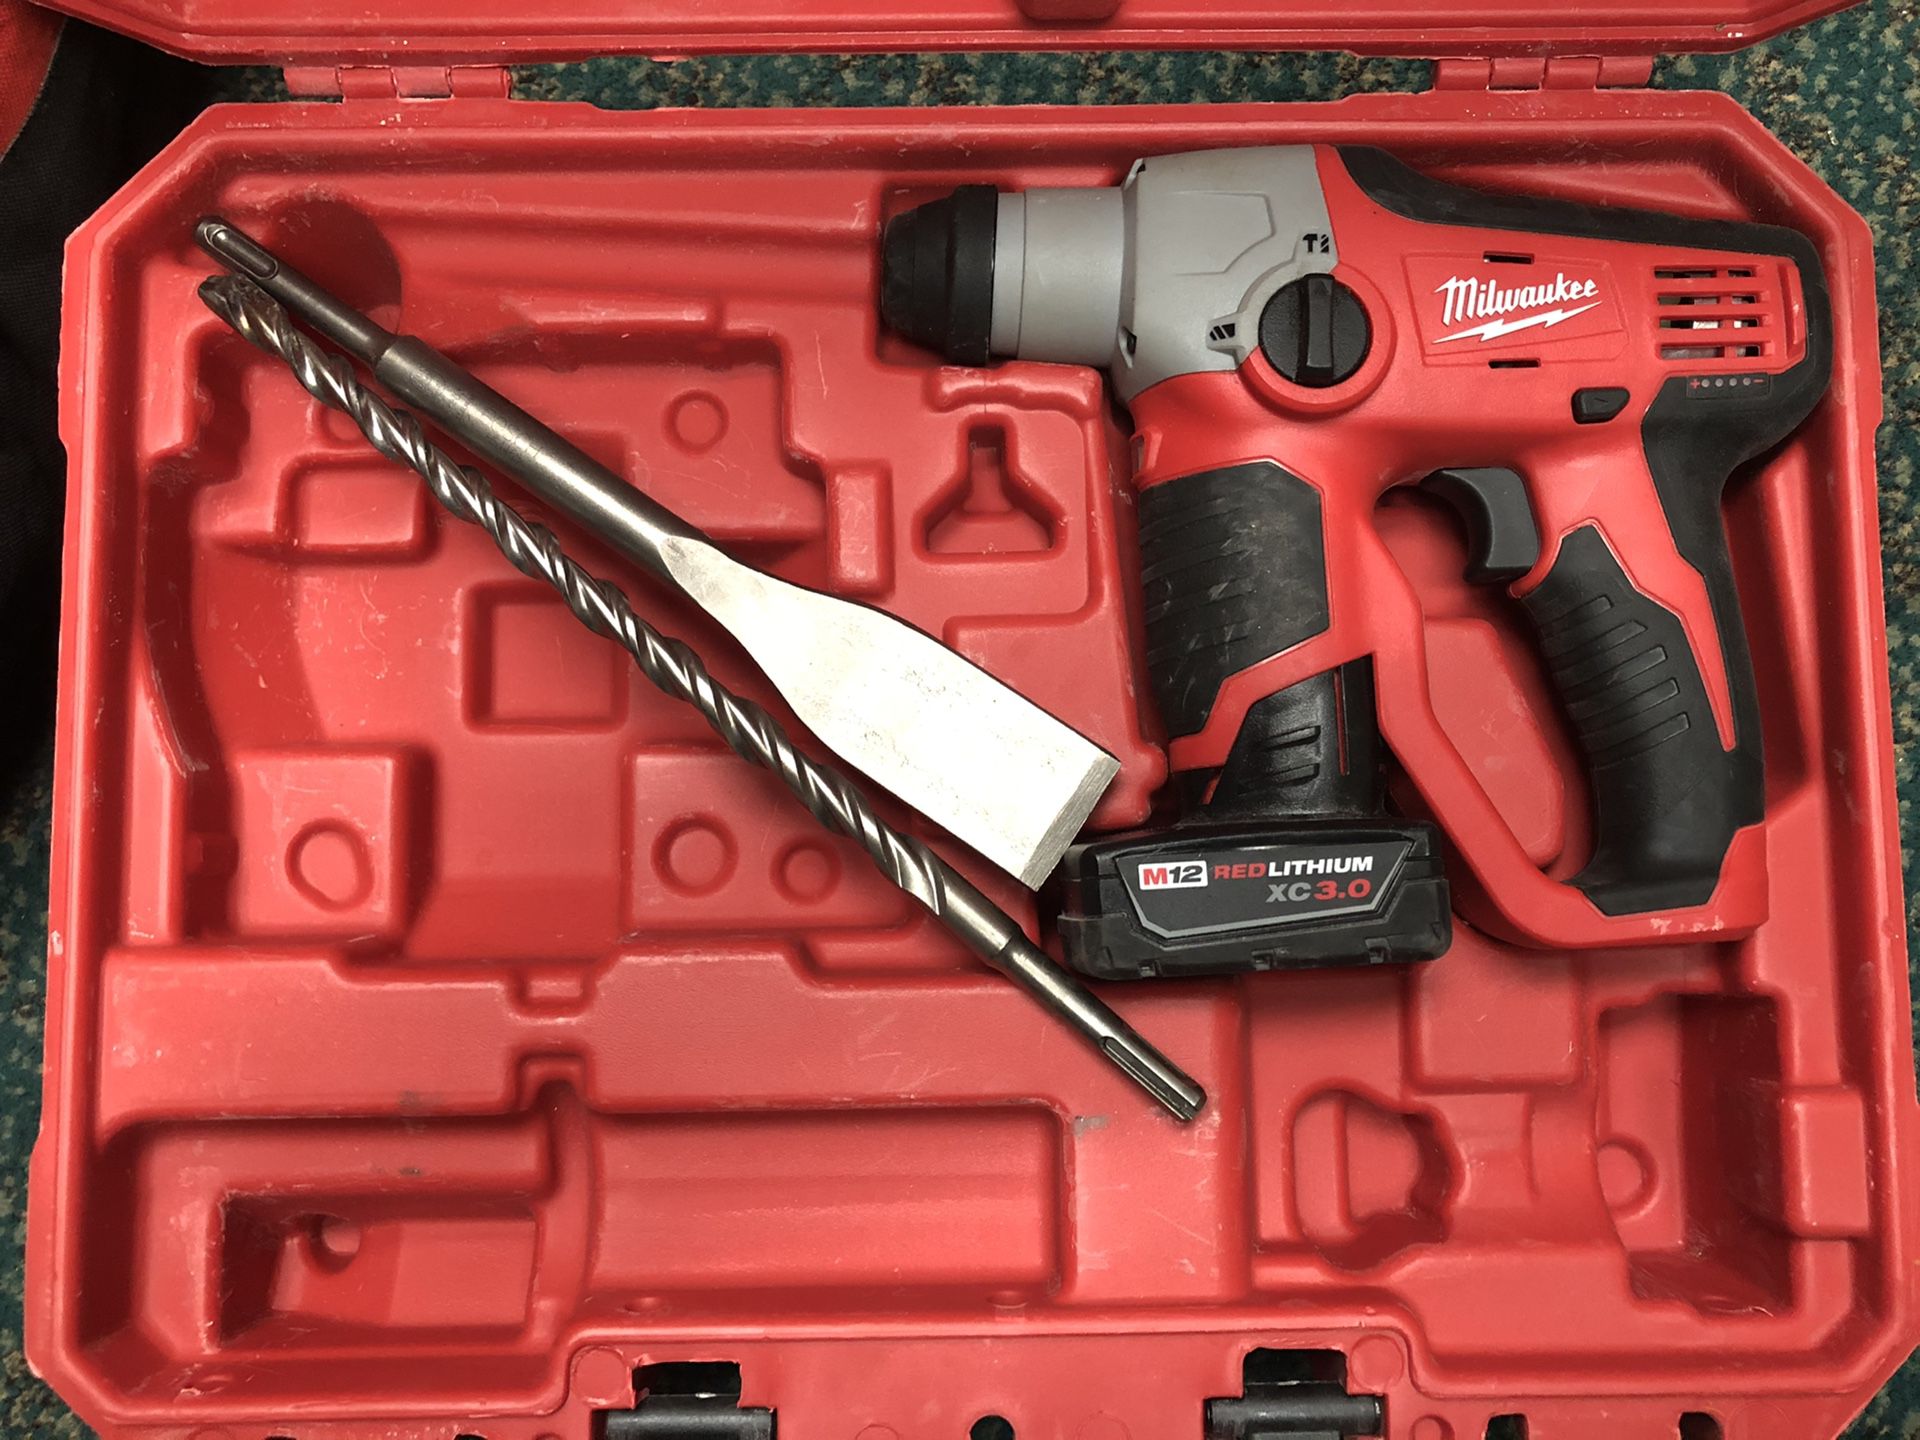 Hammer Drill, Tools-Power Milwaukee HammerDrill W/Battery no Charger